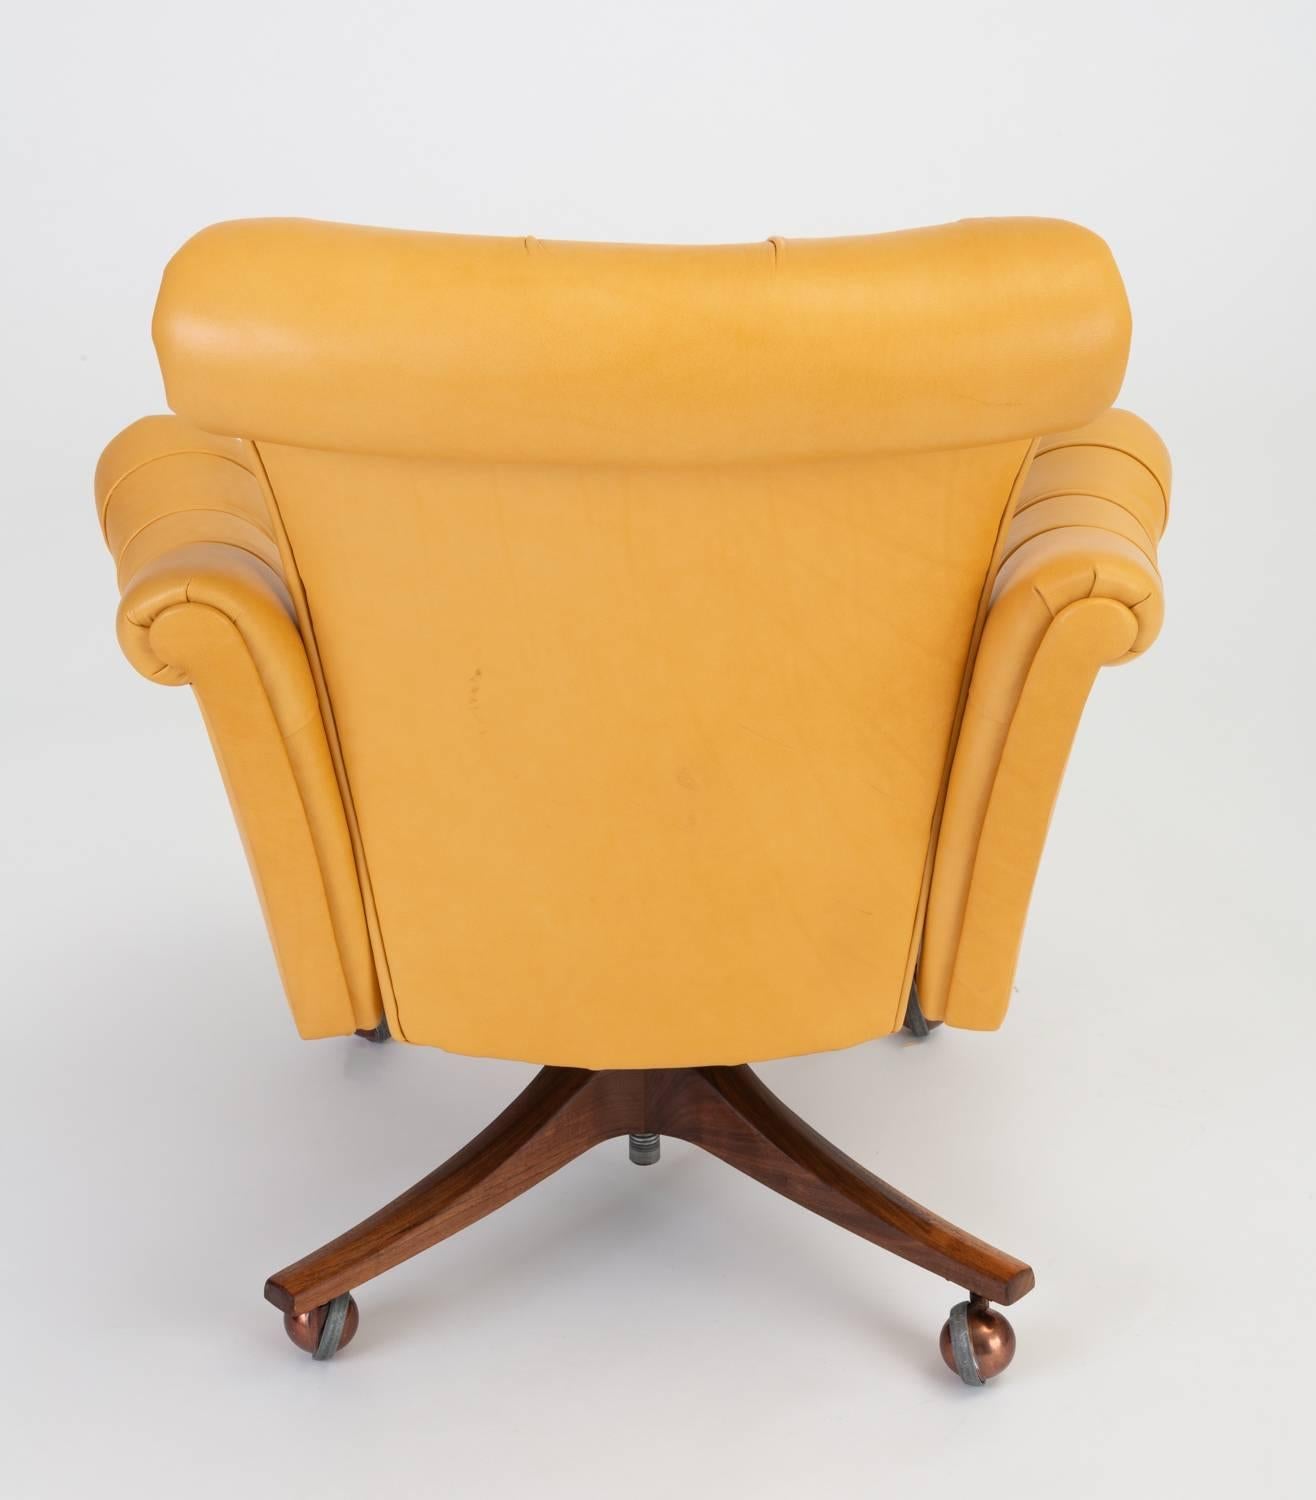 Model 932 “In Clover” Executive Office Chair by Edward Wormley for Dunbar 2